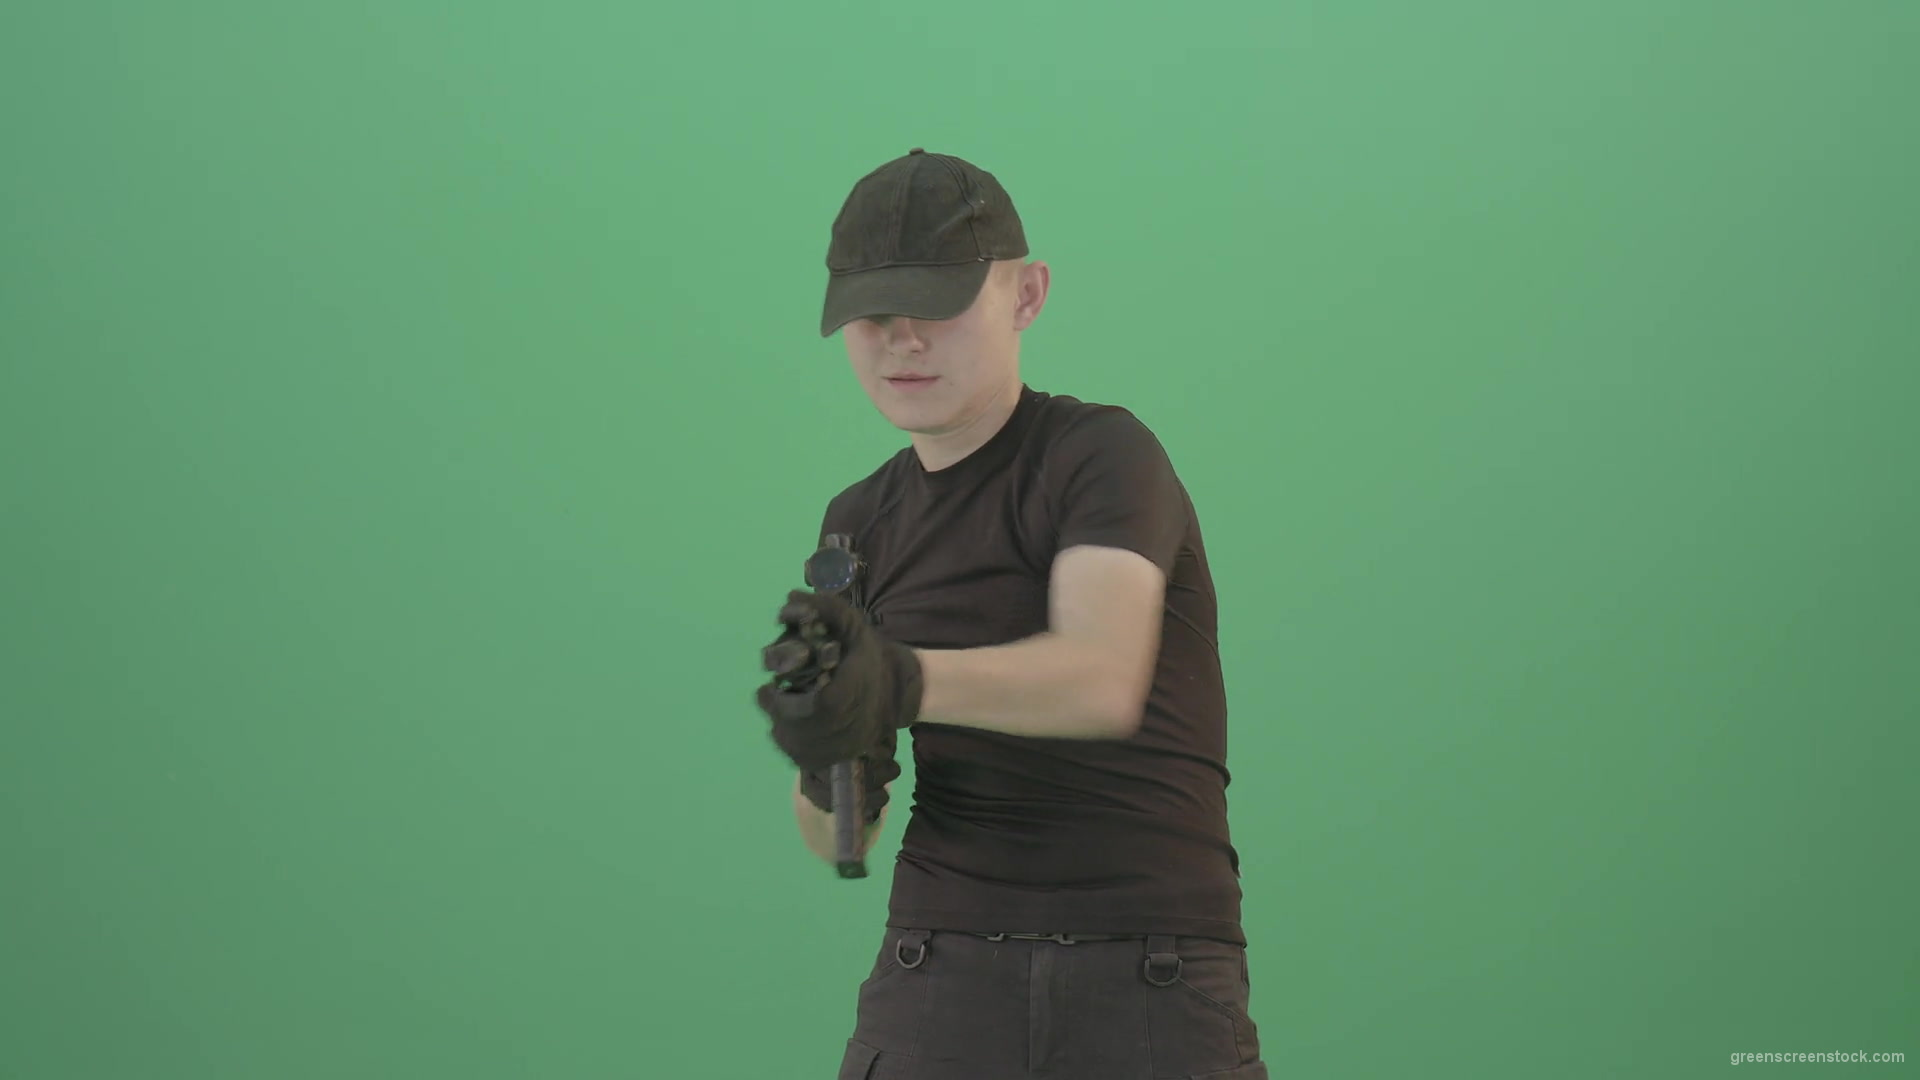 Funny-Small-boy-terrorist-shooting-enemies-from-machine-gun-isolated-on-green-screen-4K-Video-Footage-1920_004 Green Screen Stock